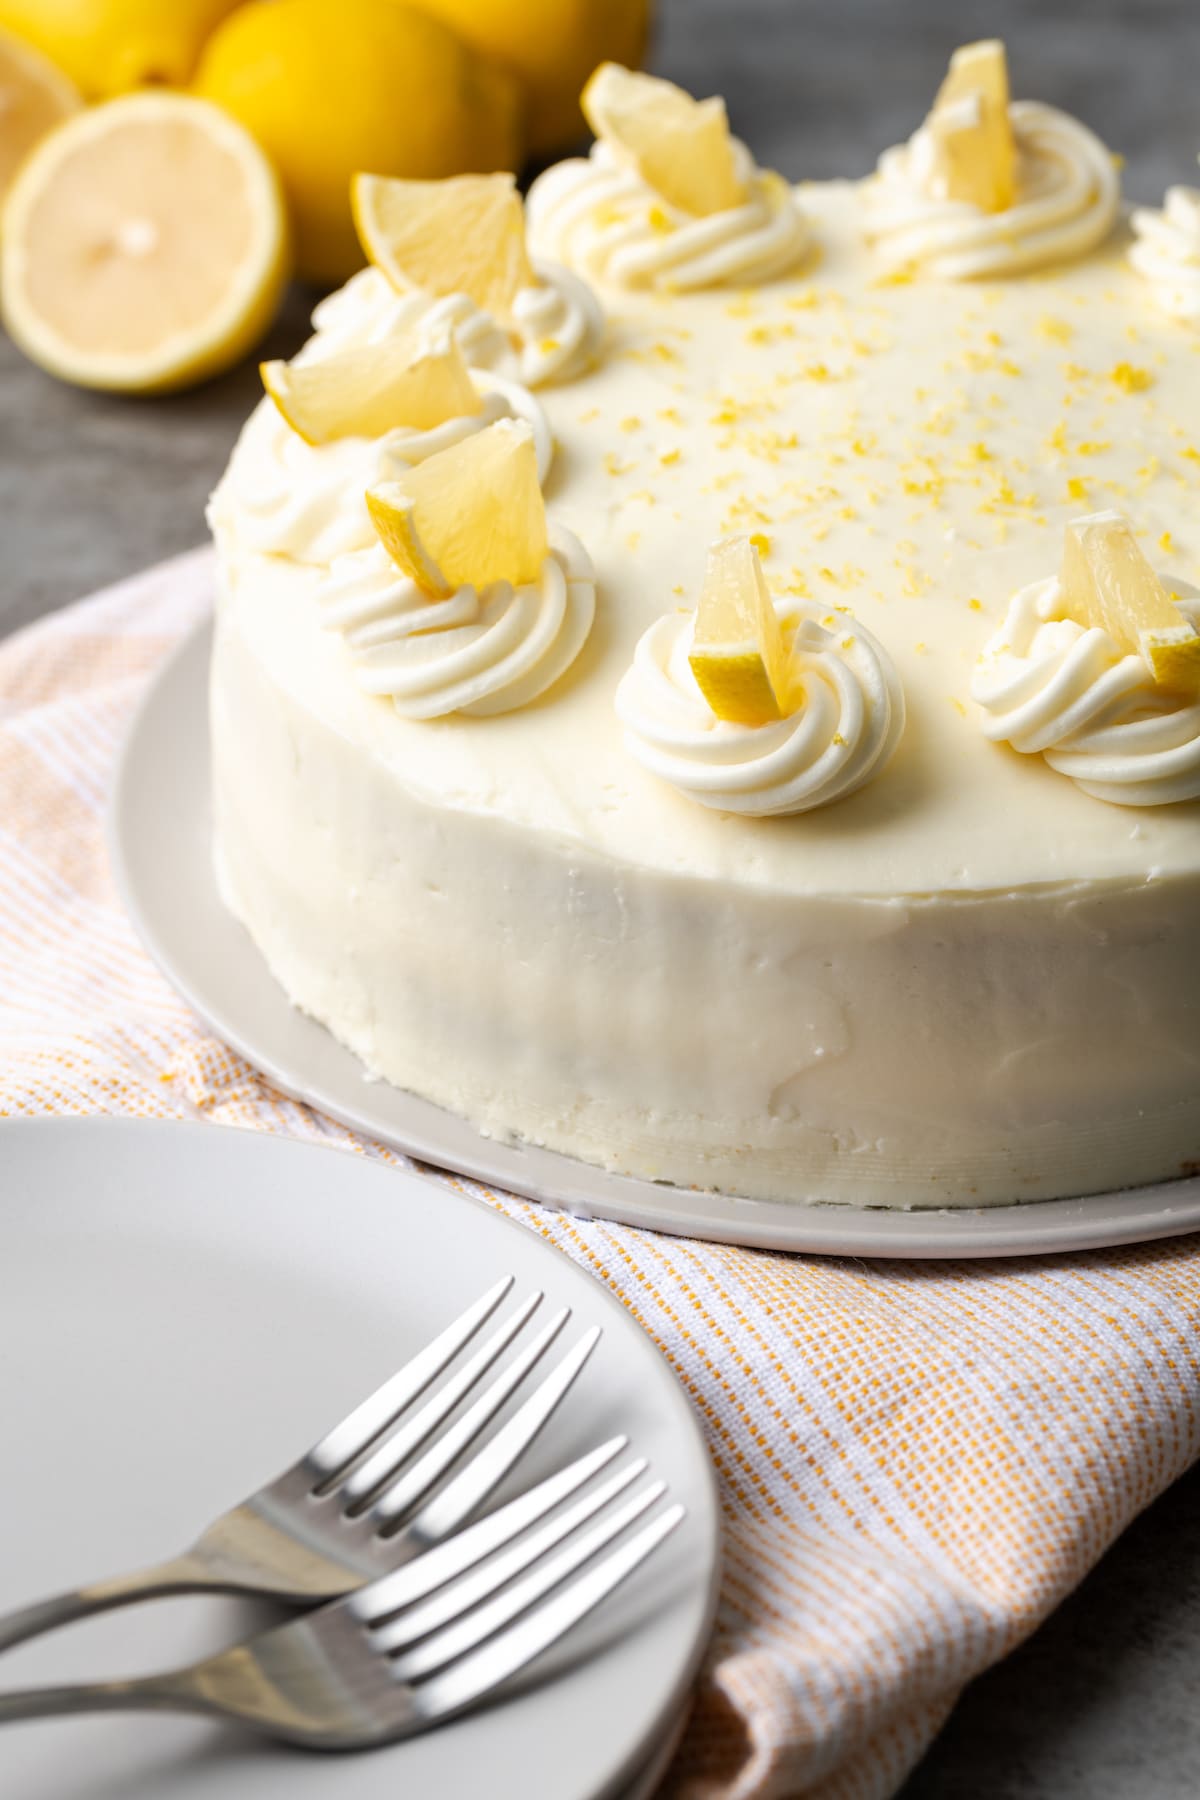 Lemonade cake topped with frosting swirls and lemon slices next to a plate with two forks.